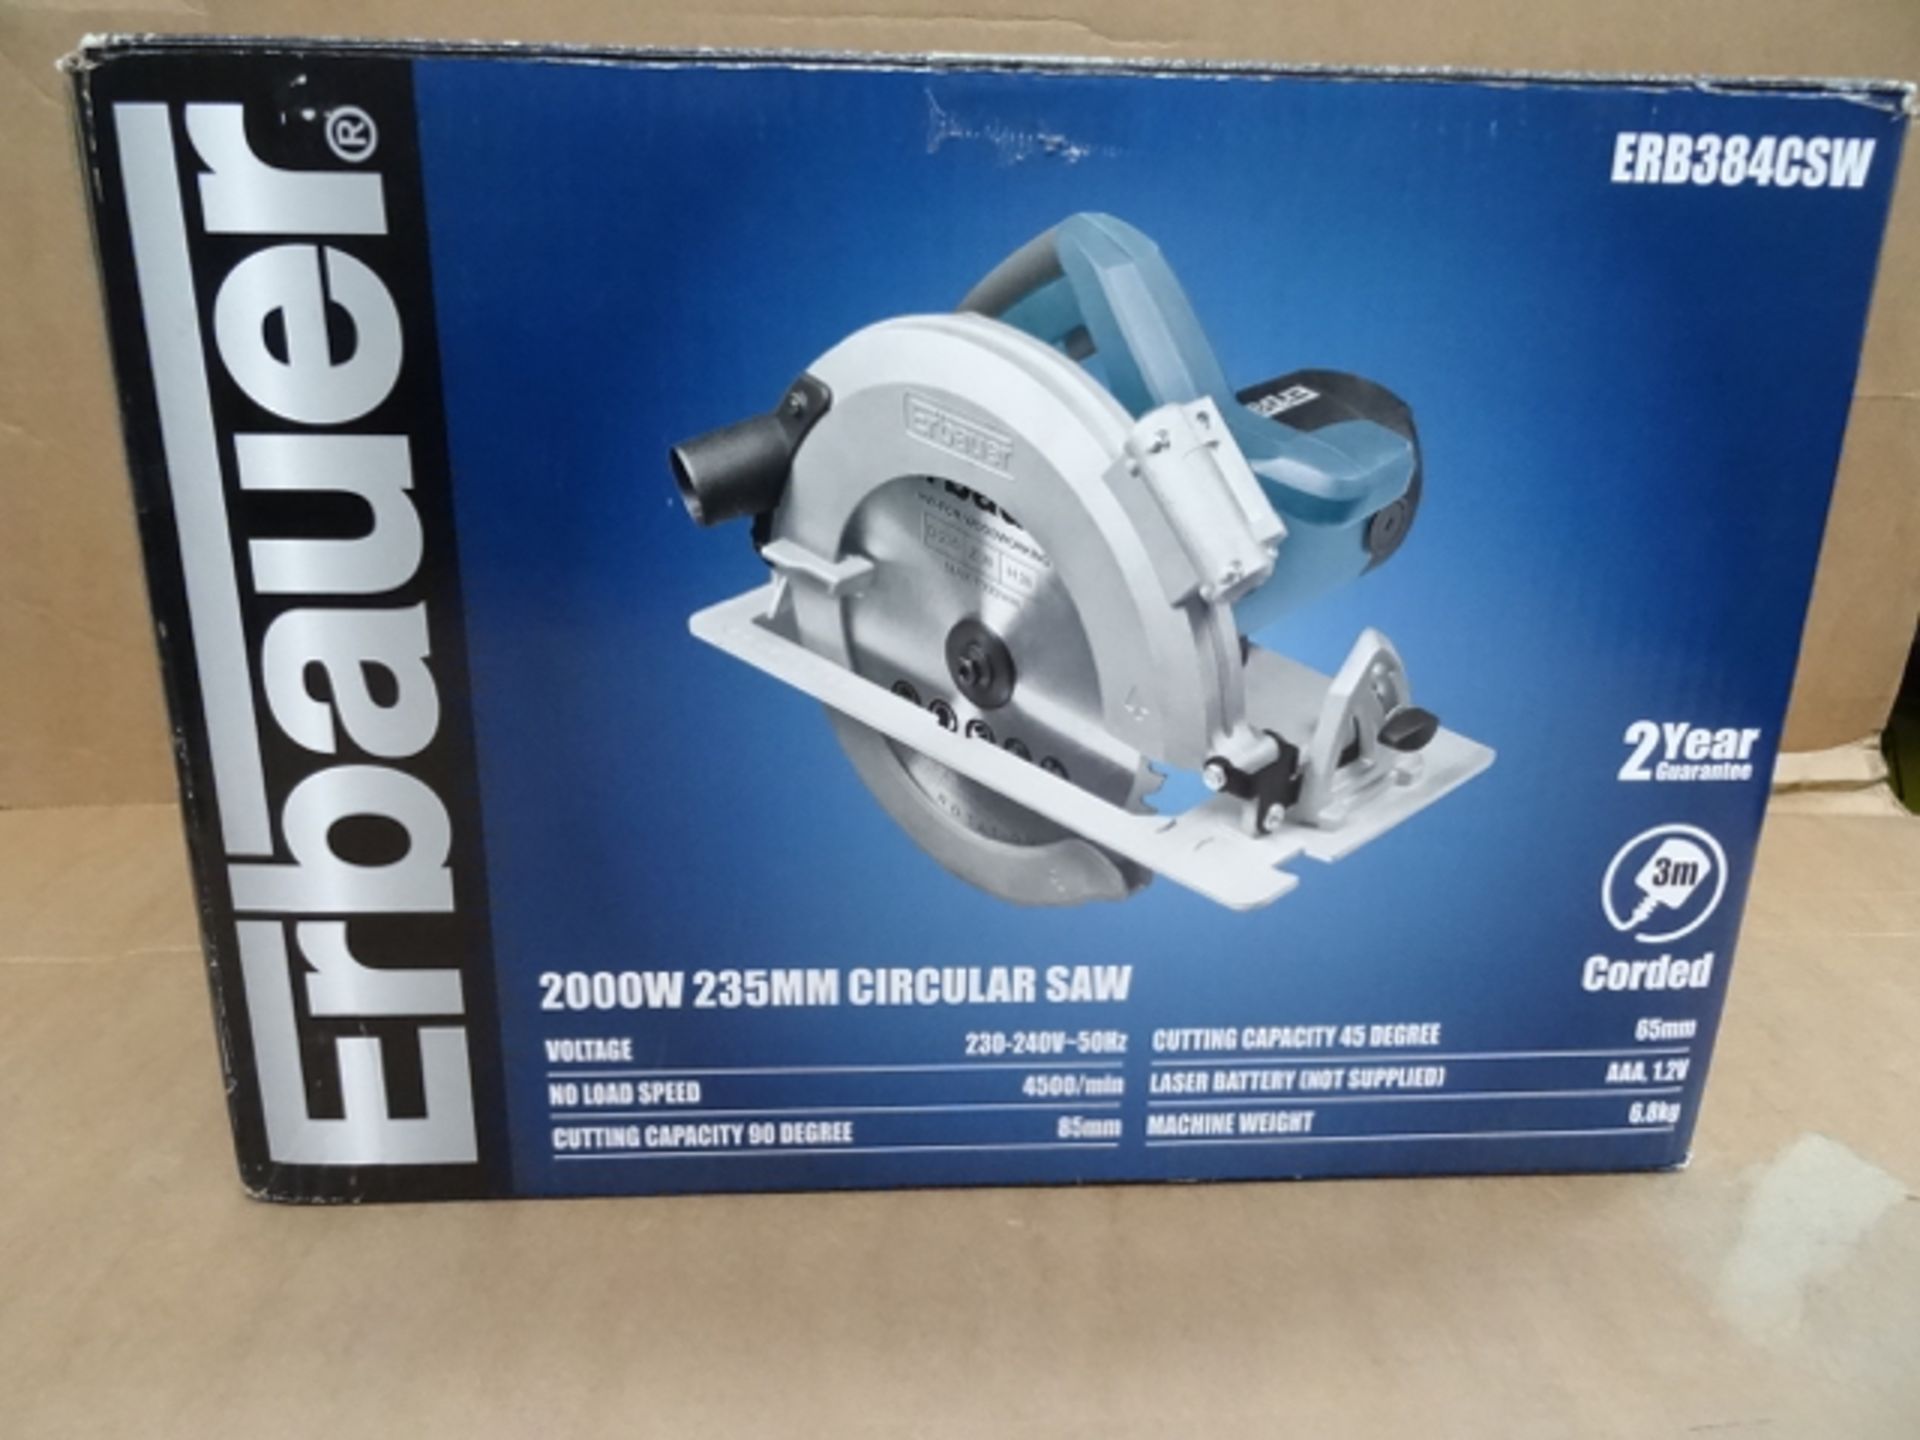 1 x Erbauer ERB384CSW 2000W 235MM Circular Saw. Professional saw with laser and parallel guide, - Image 2 of 2